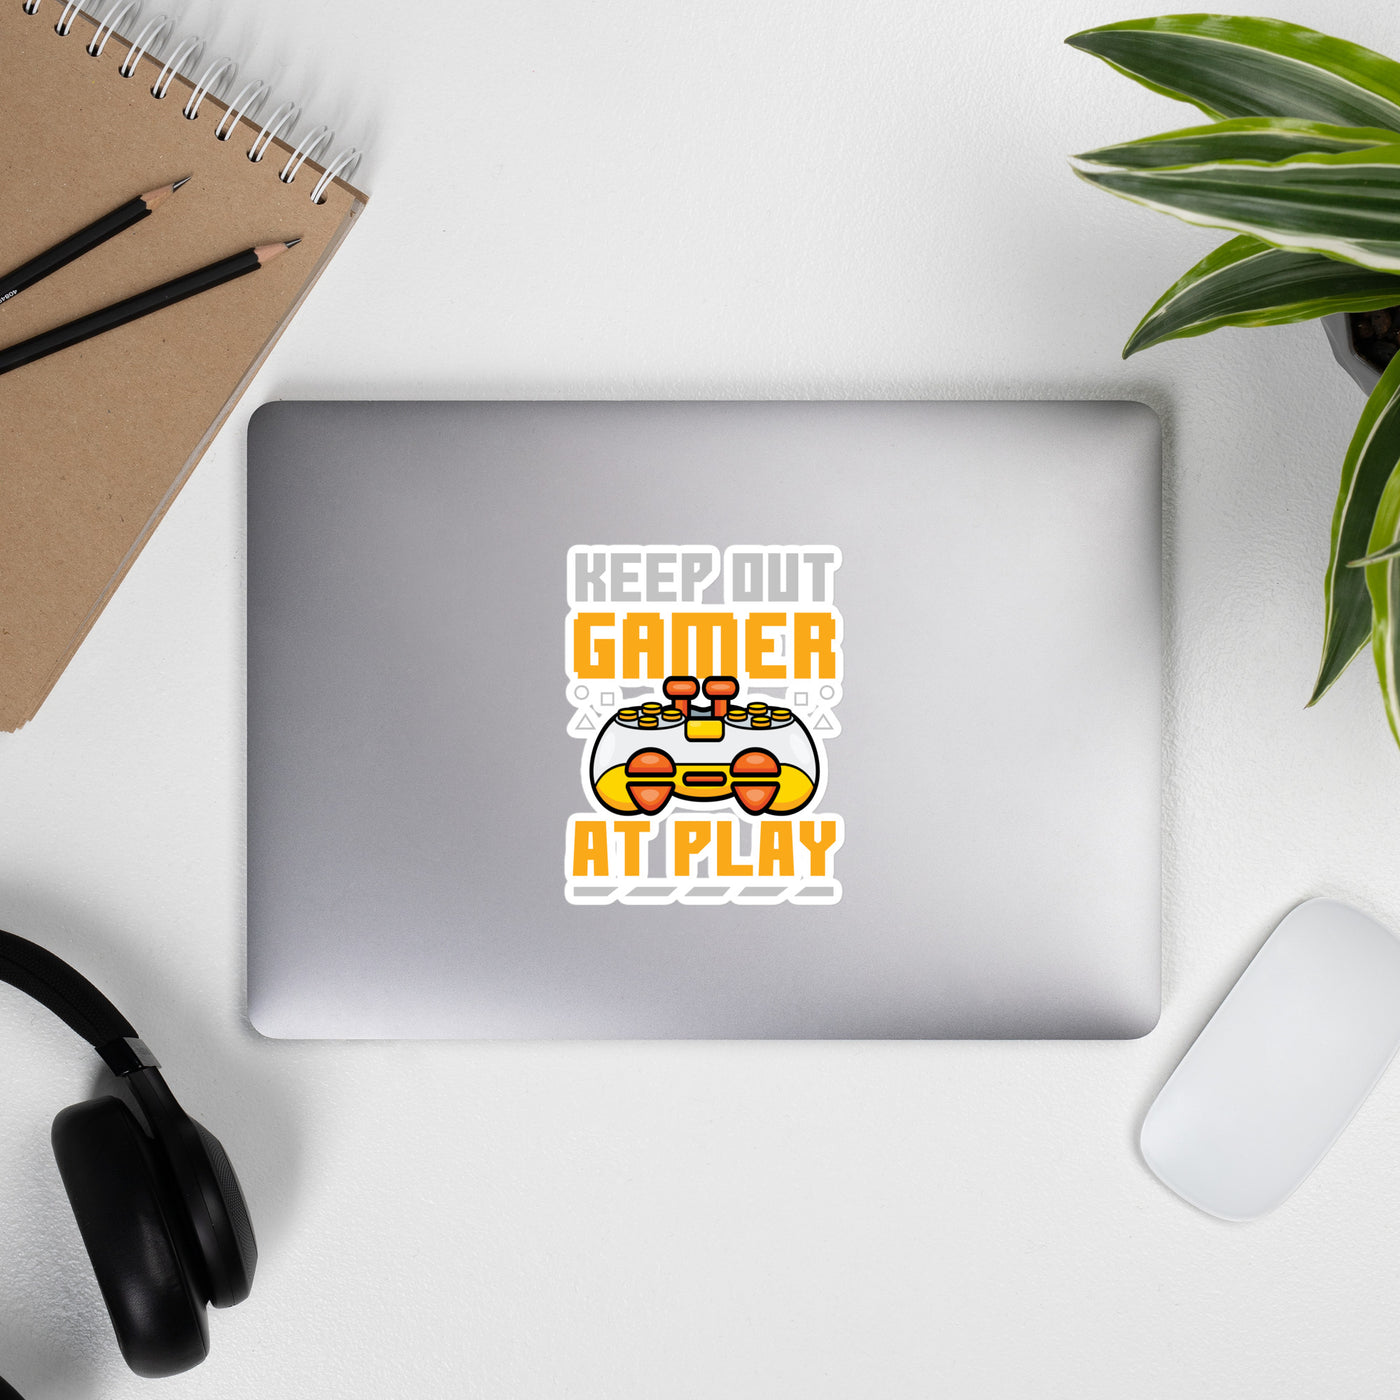 Keep Out Gamer At Play Rima 7 - Bubble-free stickers